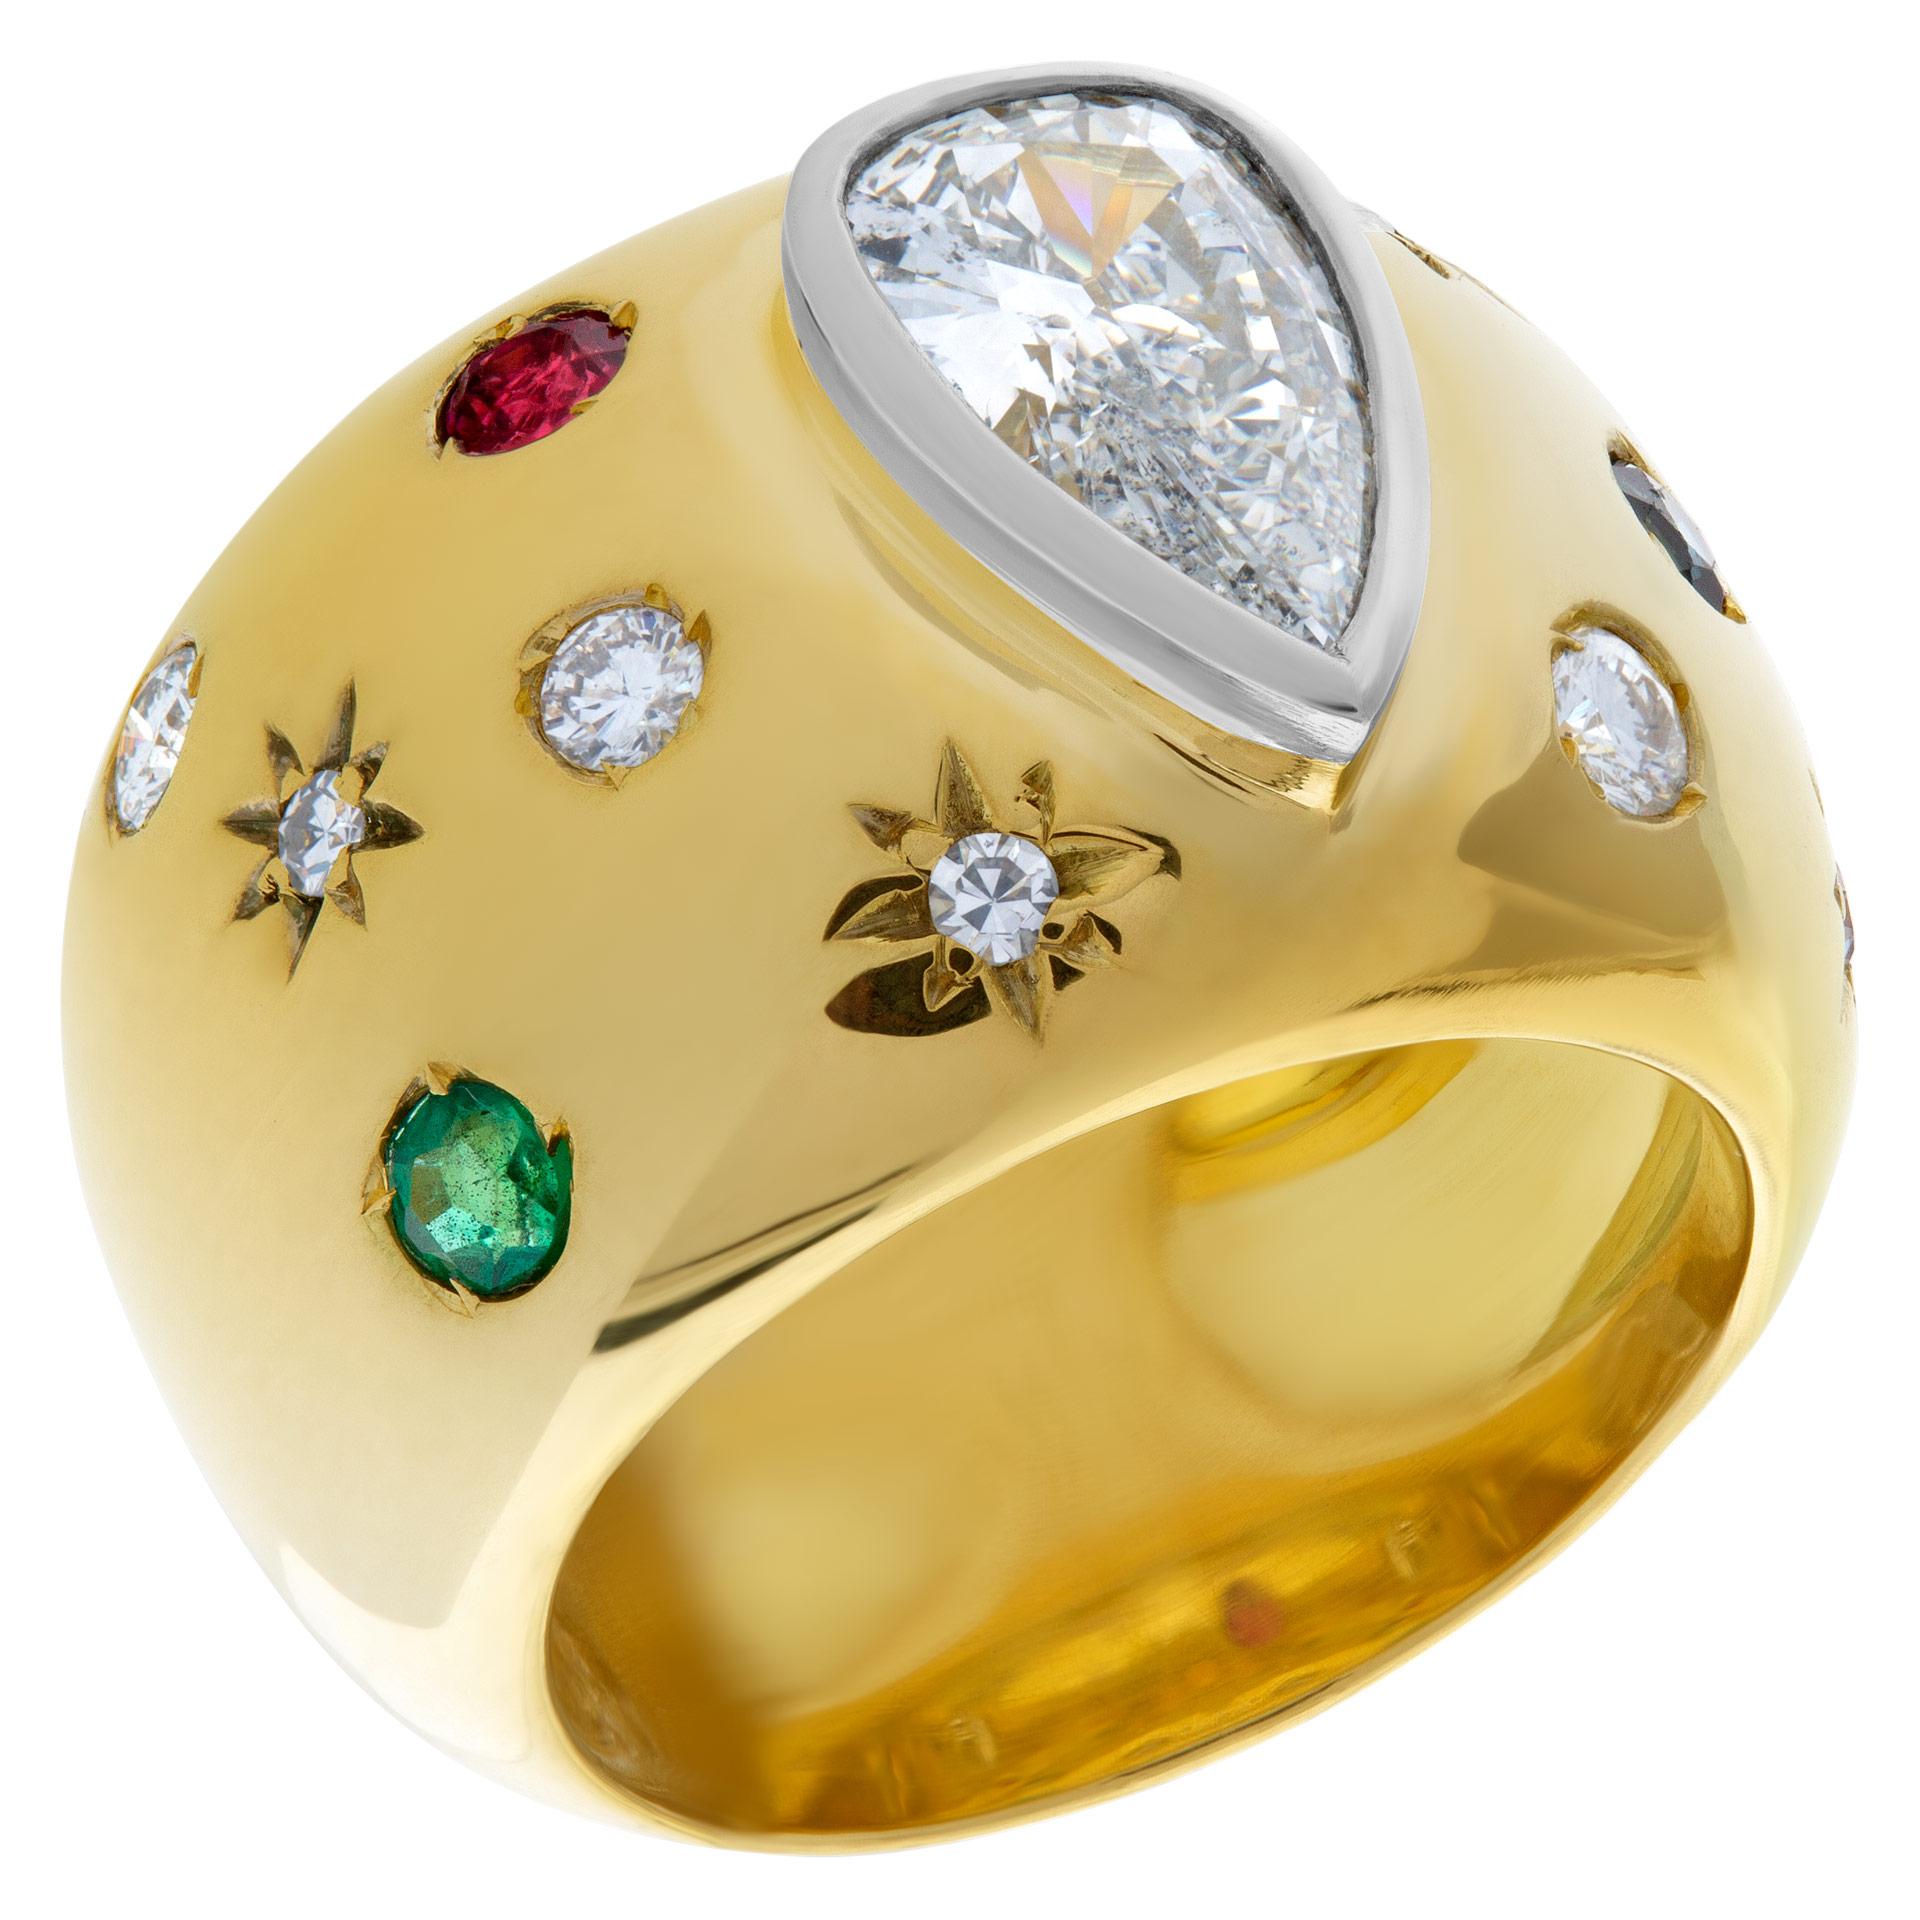 GIA certified pear shape diamond 0.97 carat (H color, SI2 clarity) set in colorful 18k wide setting with diamond, ruby & emerald accents. Size 5.5.  Ring width: 15.5mm. This GIA certified ring weighs 14.1 pennyweights and is 18k.
